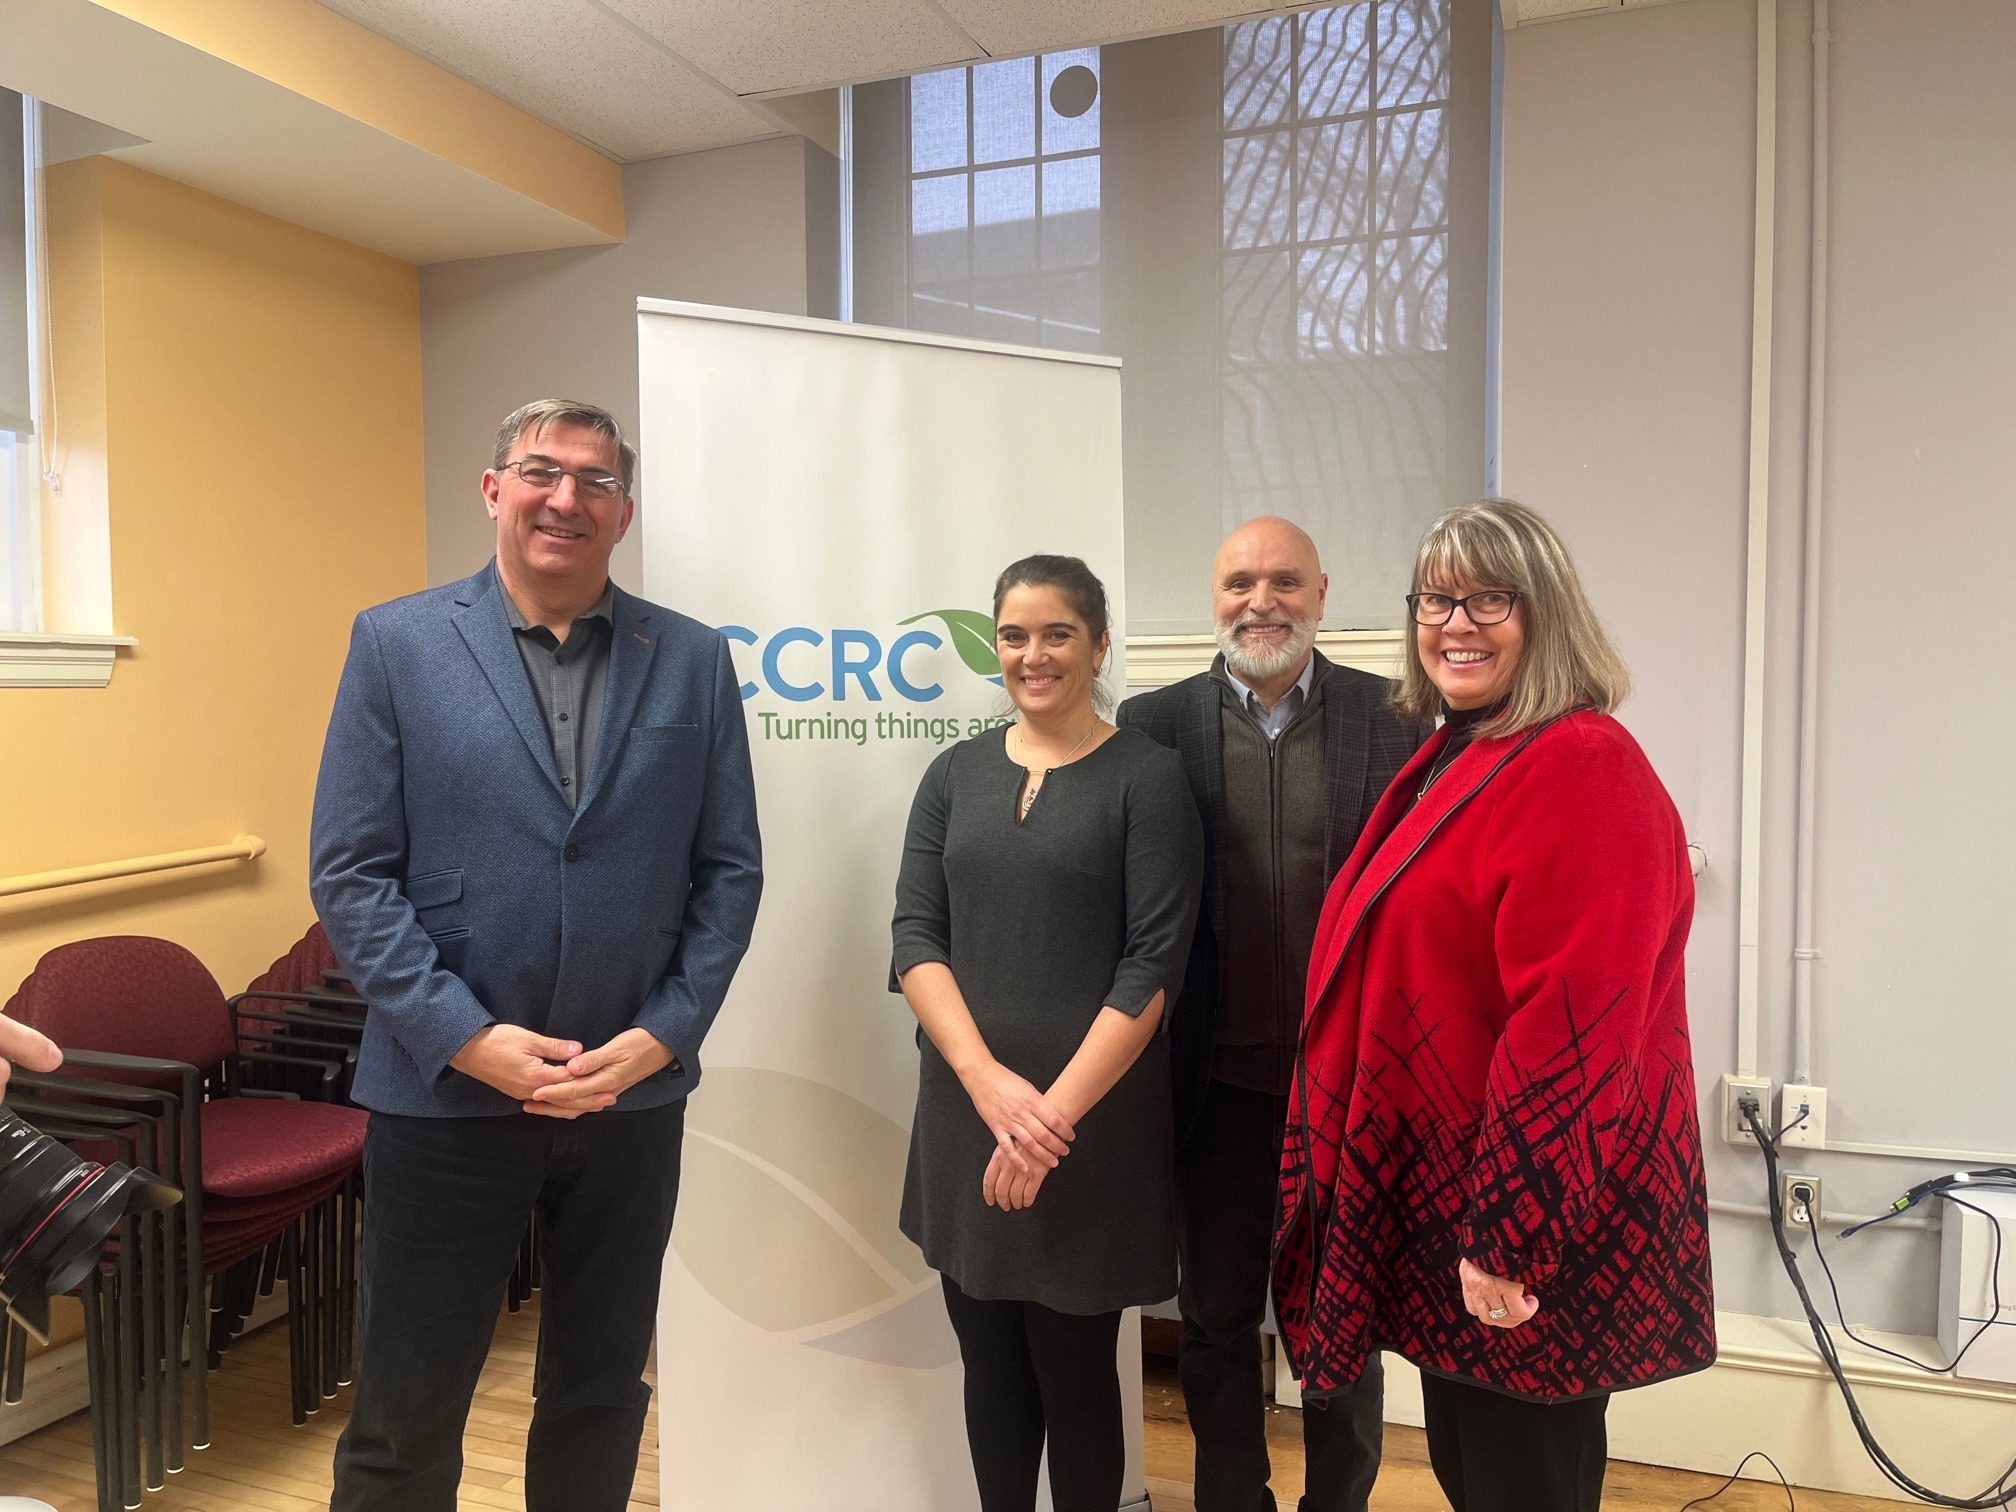 CCRC welcomed MPP Dave Smith, Trillium Volunteer Paul Rosebush, CCRC Board Chair Tanys Howell and CCRC Executive Director Kirsten Armbrust